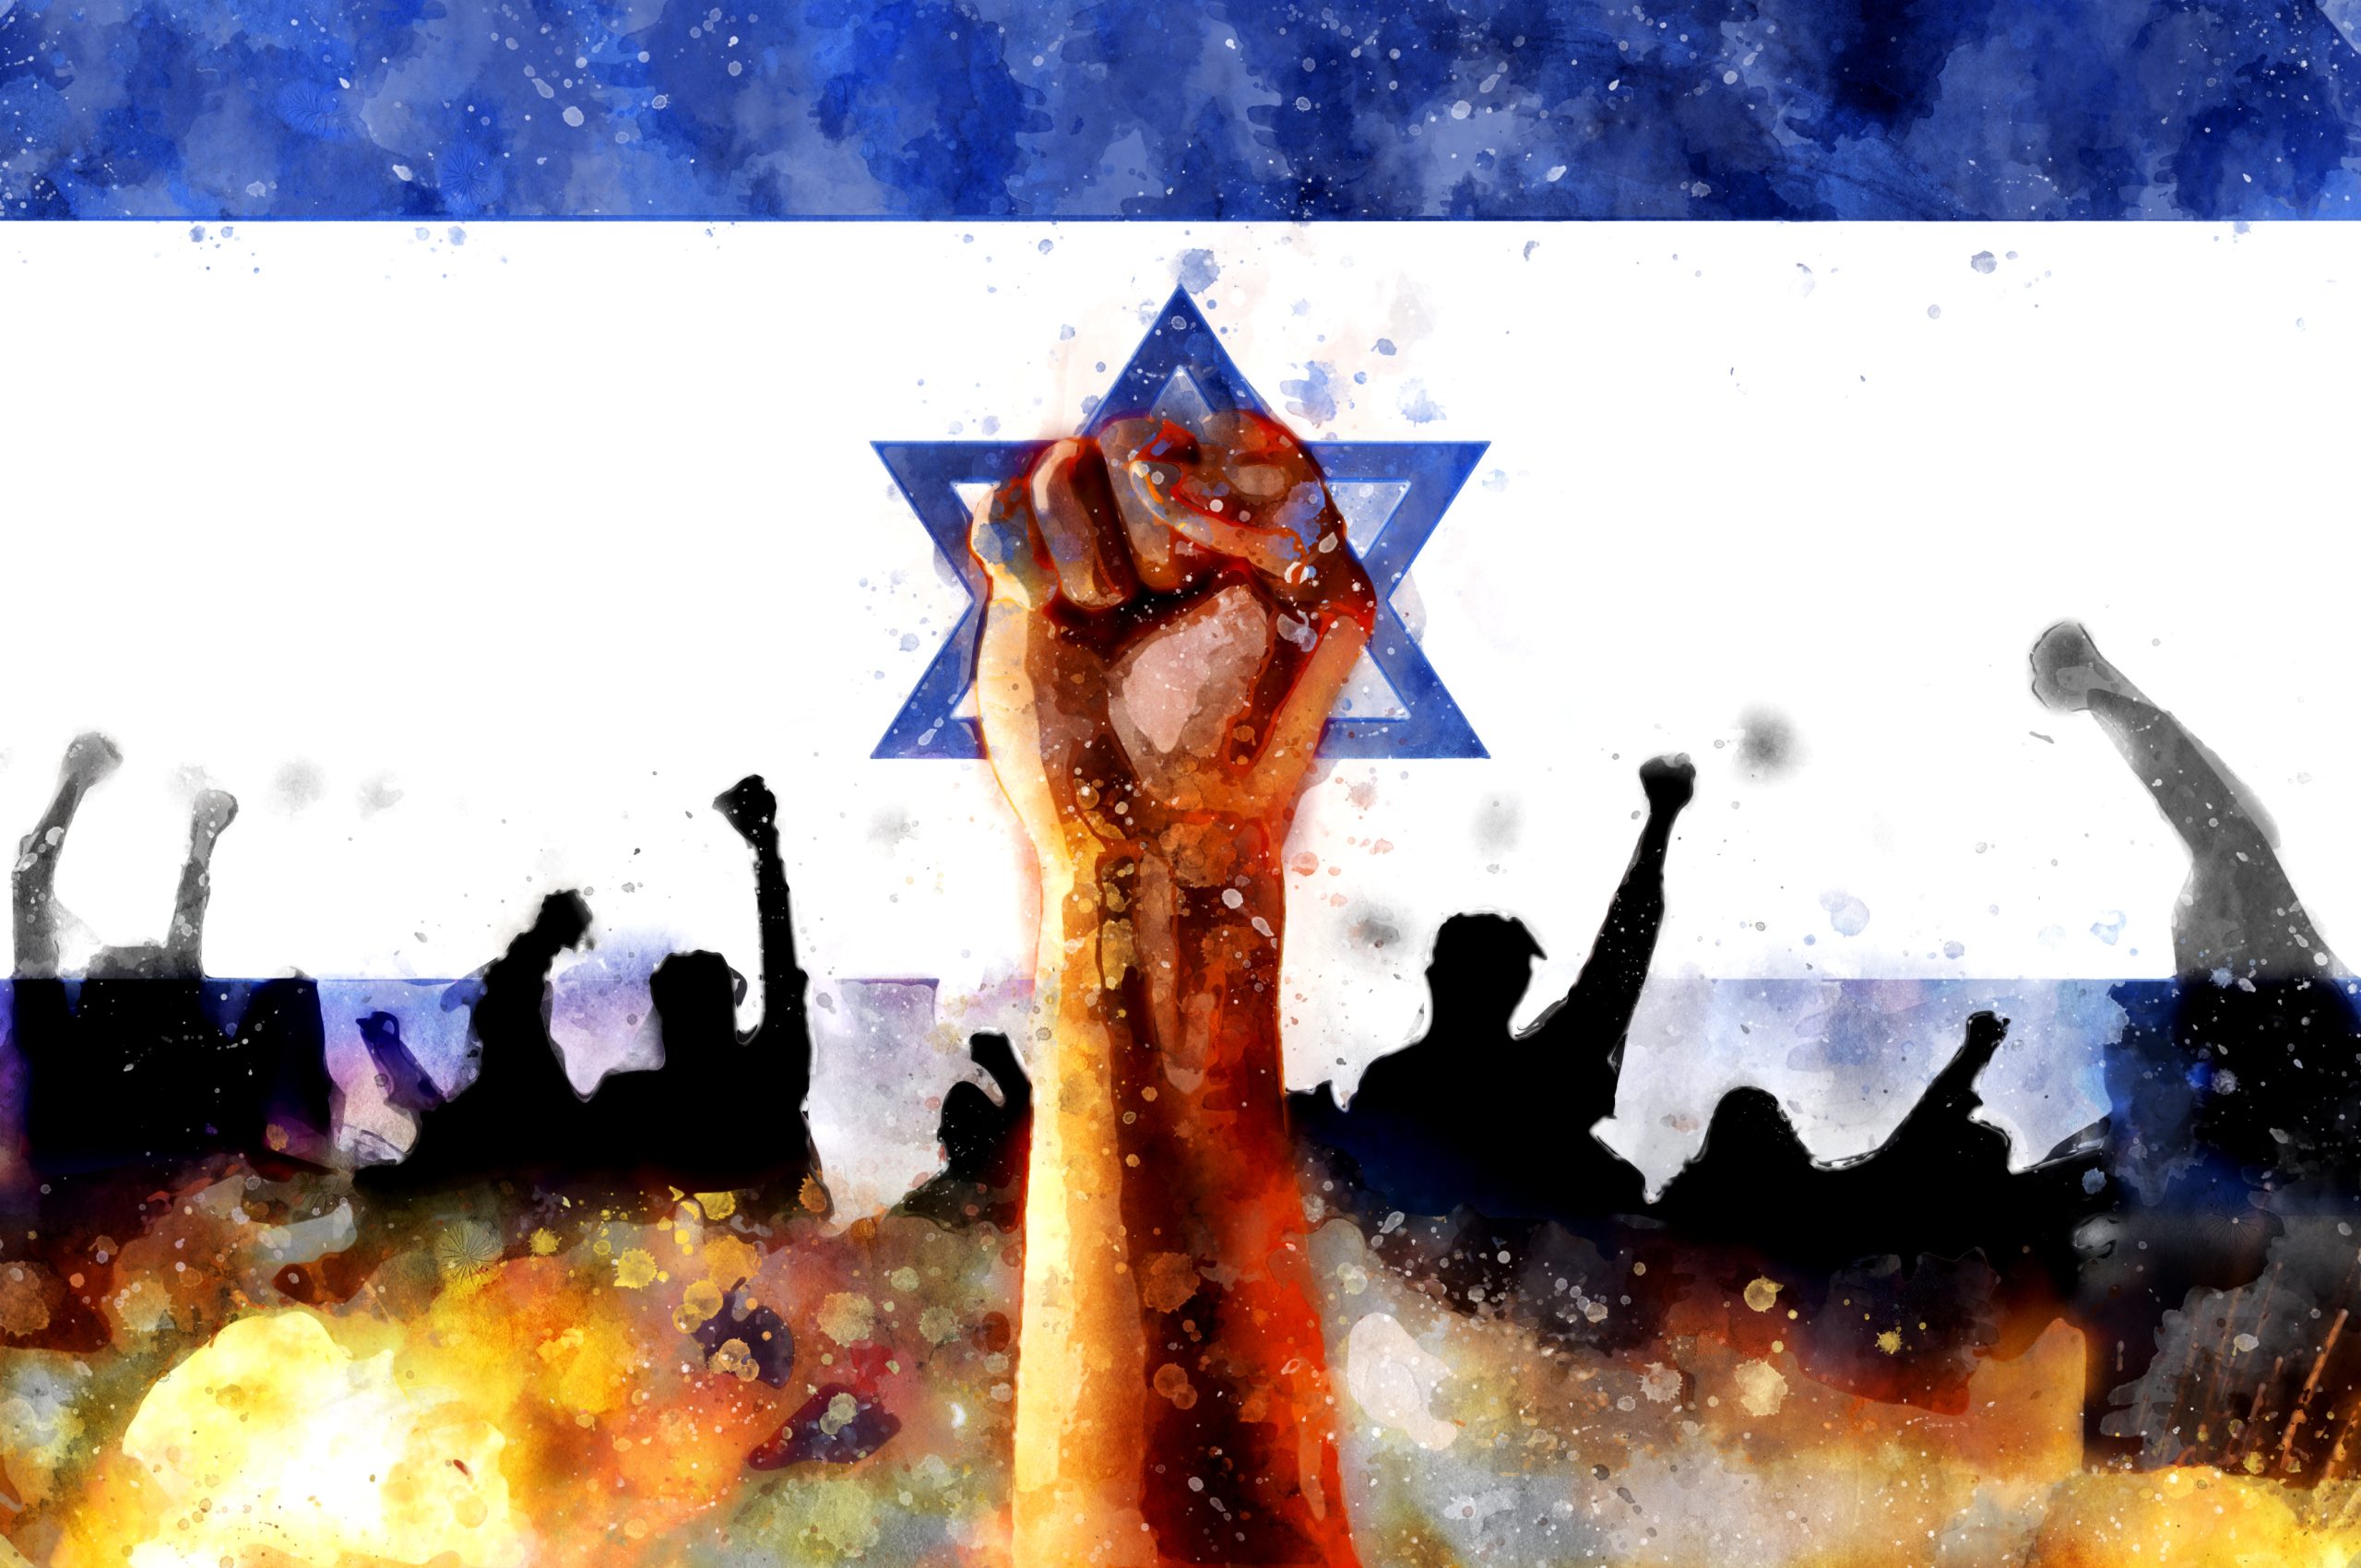 Despite unrelenting attacks by Israel’s enemies—in the media, on college campuses, in the UN, even in the halls of Congress—lovers of Israel win the battle by telling the truth about the Jewish state . . . at home, on social and in mainstream media. We fight harder than our foes.